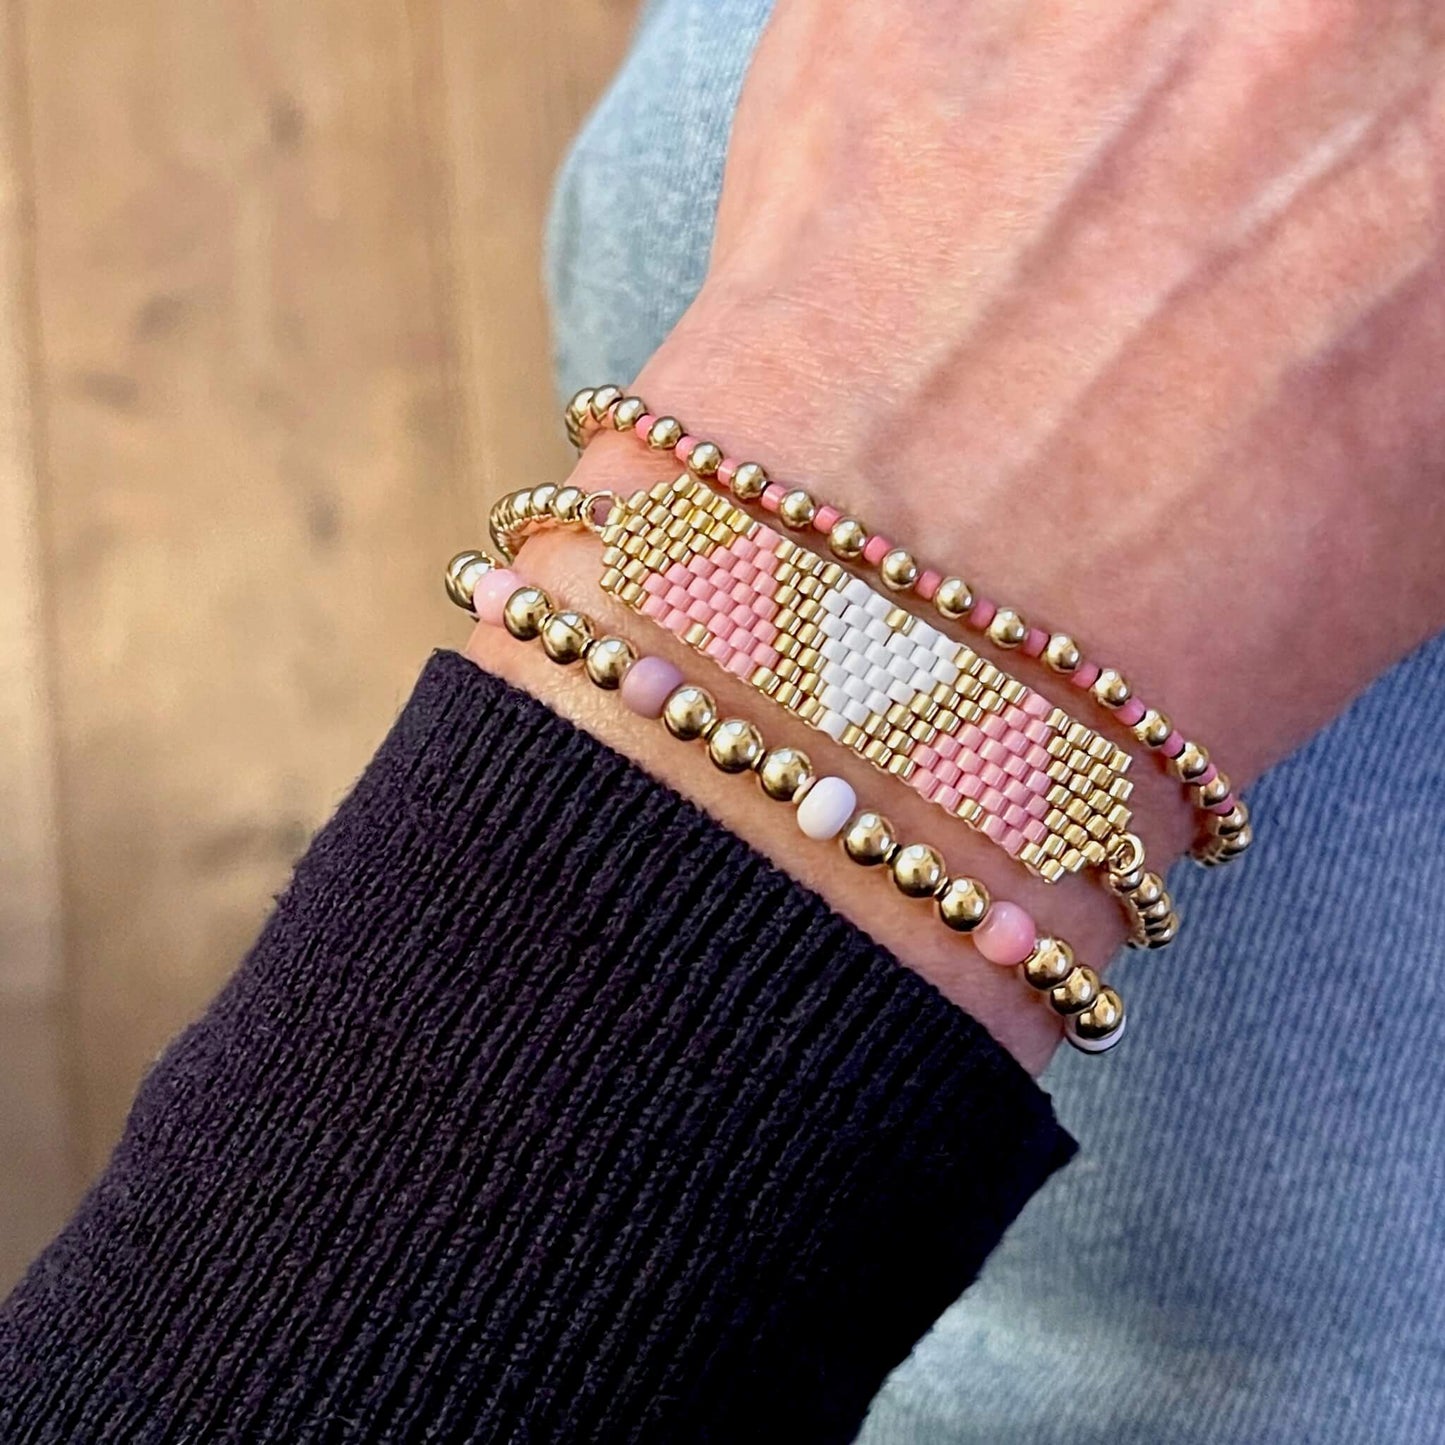 Heart beaded bracelet stack with pink, gold, and white beads.